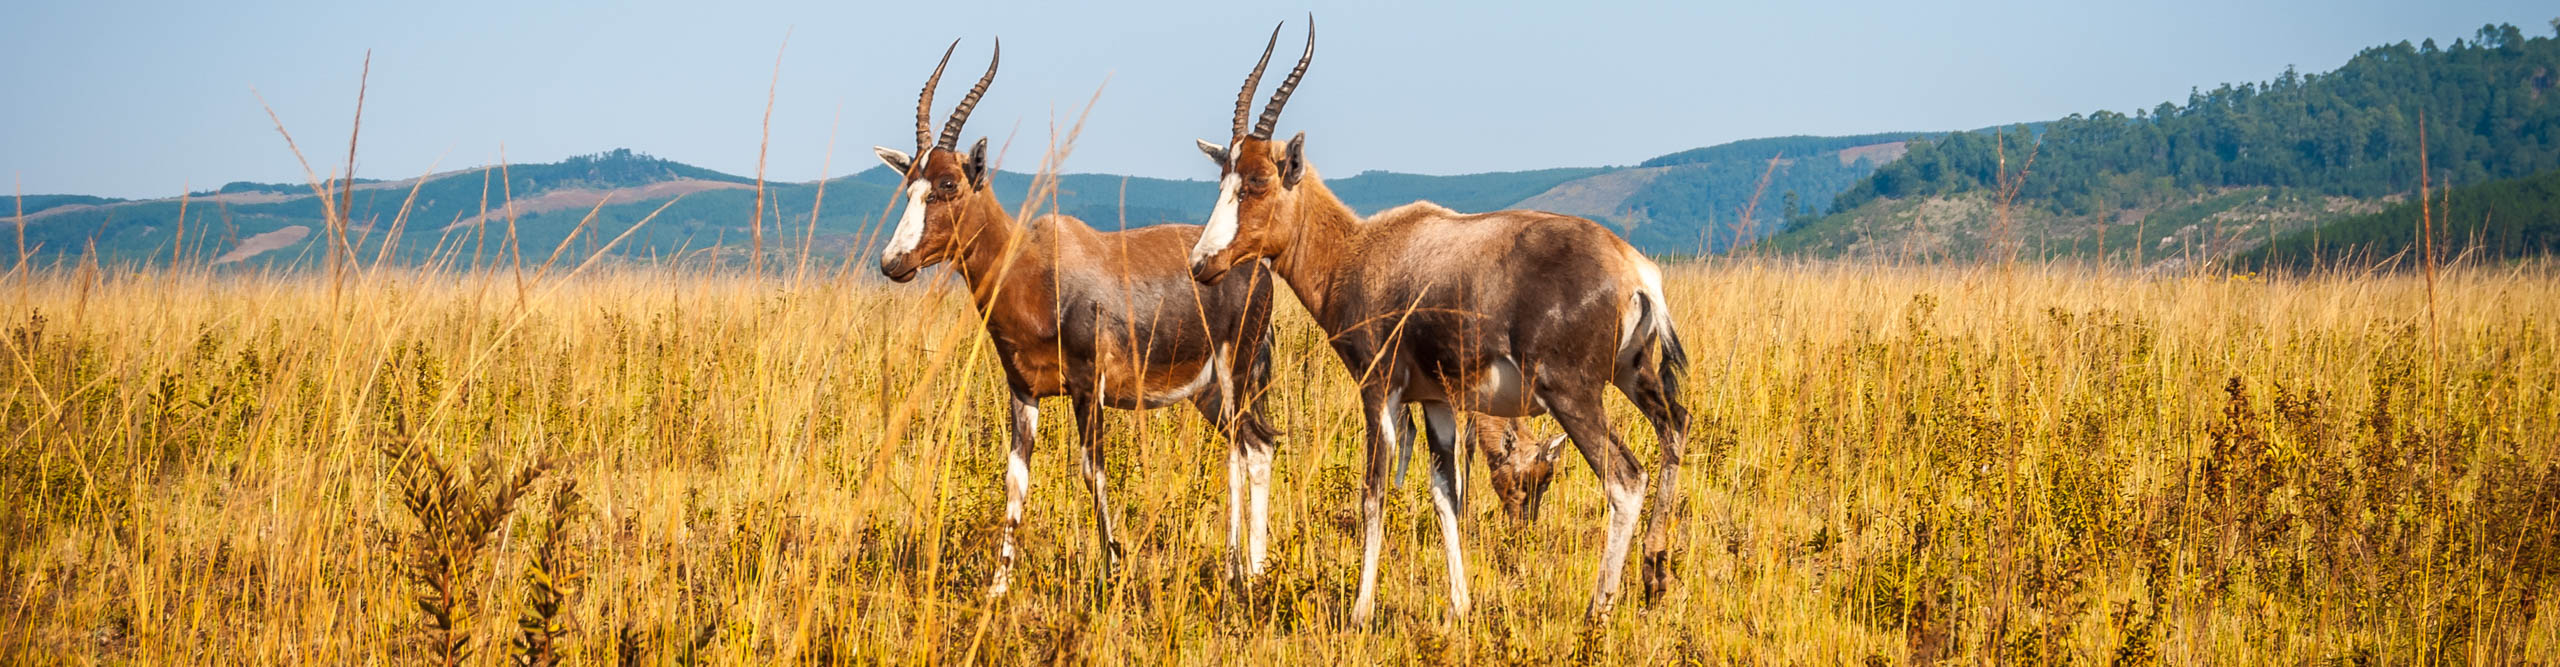 Antelope standing in the long grass on the plains of Swaziland